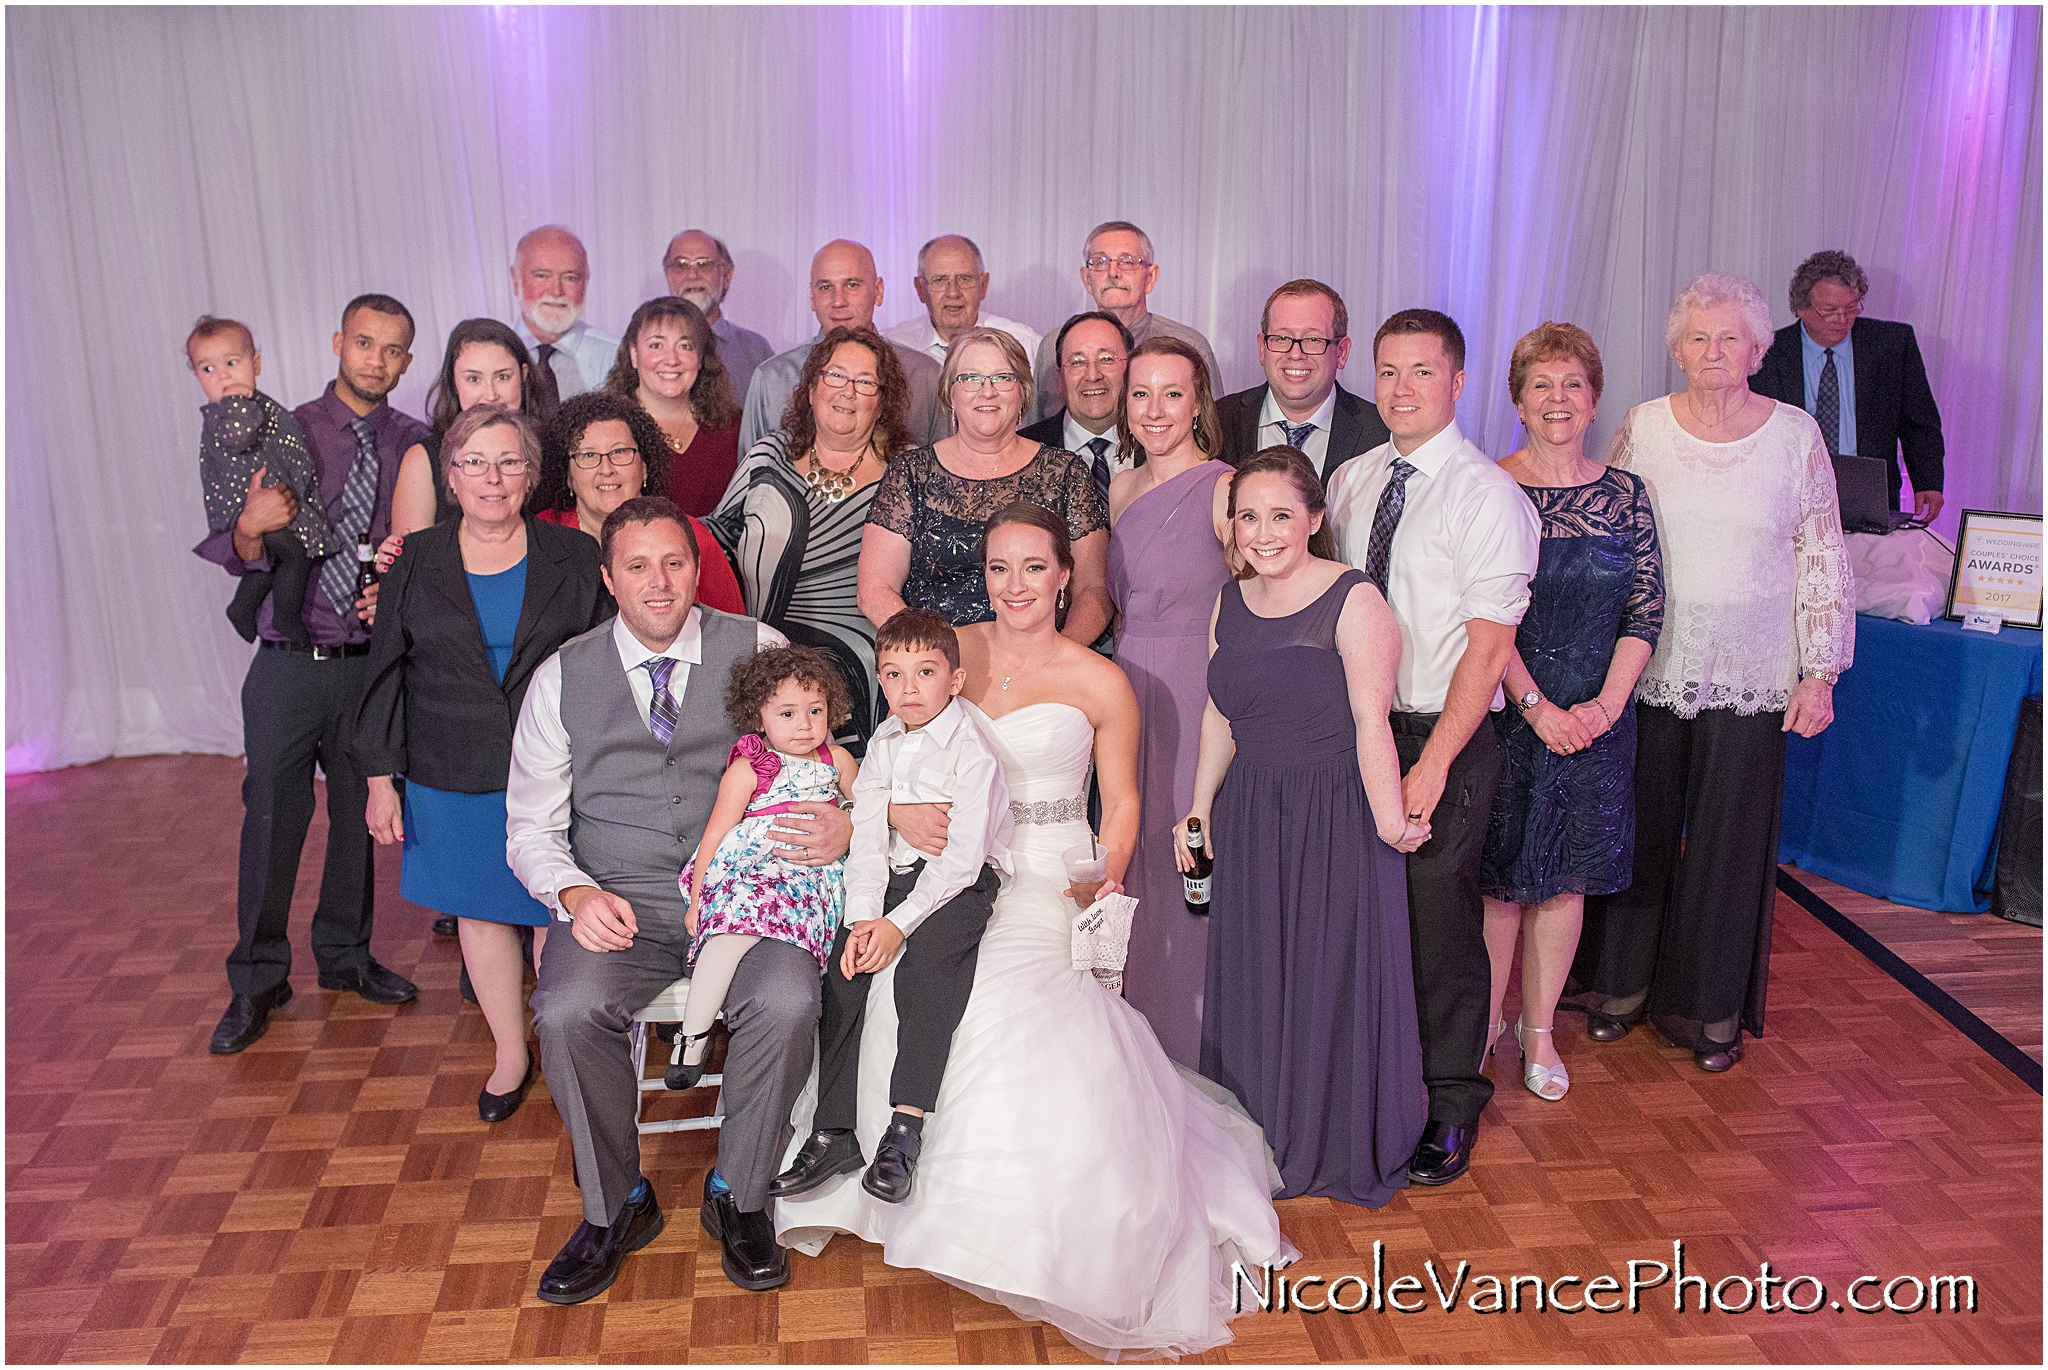 Extended family photo during the wedding reception at the Brownstone.